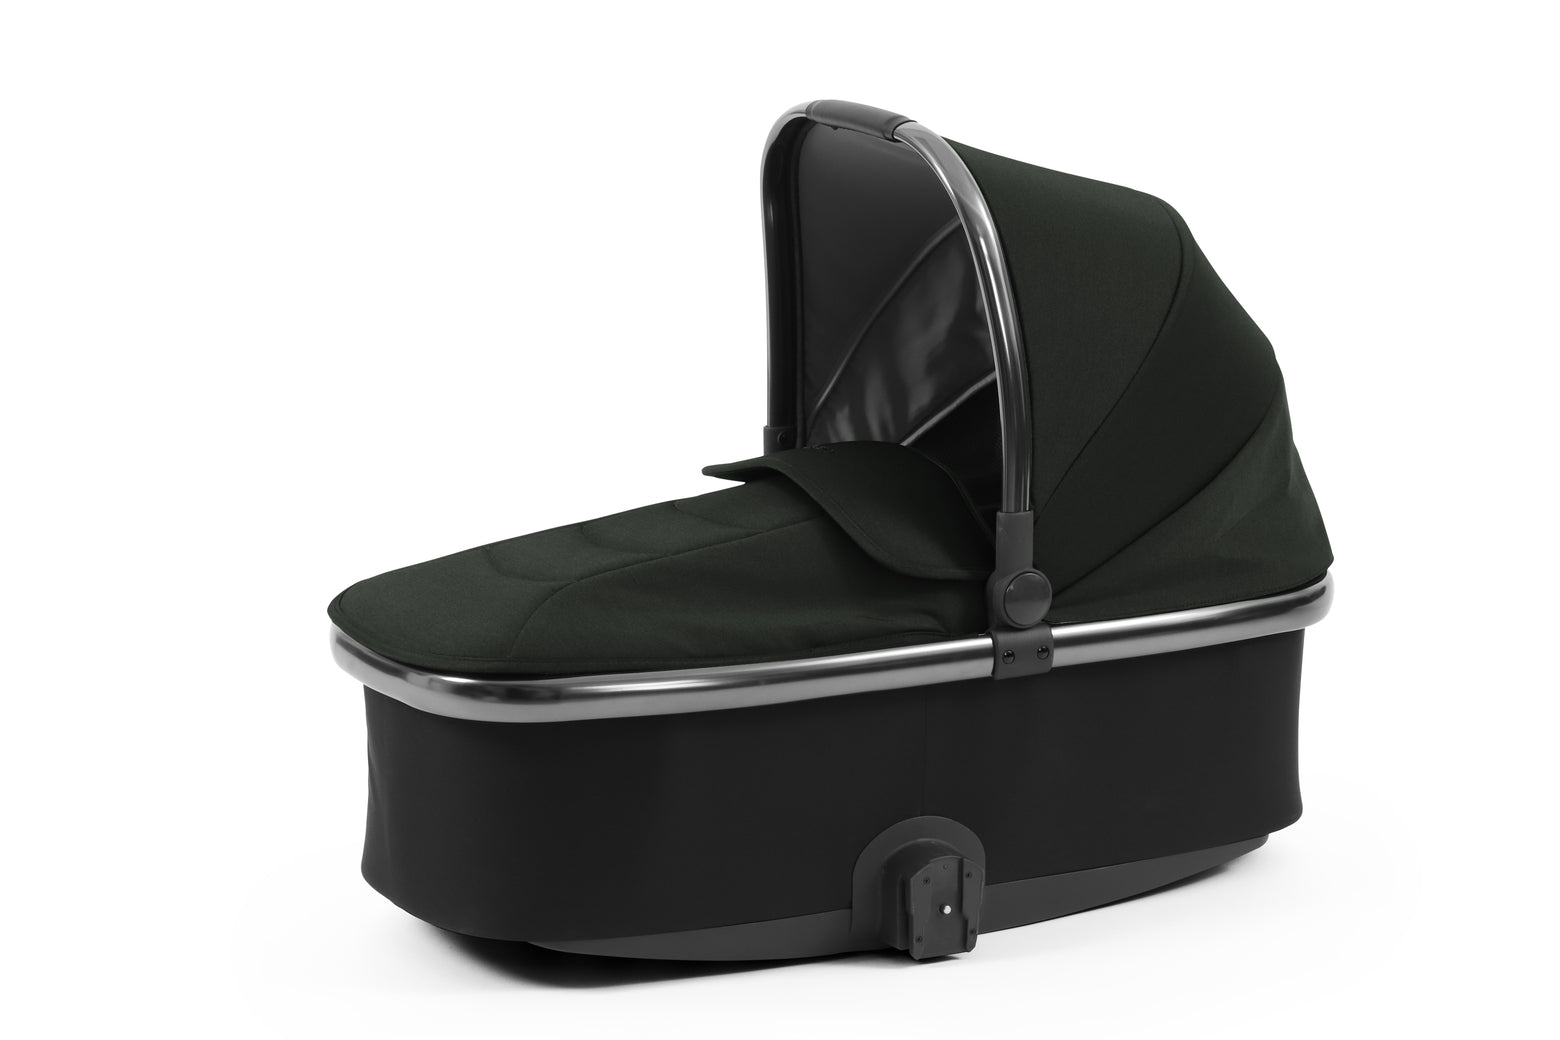 BabyStyle Oyster 3 Carrycot - Black Olive - For Your Little One